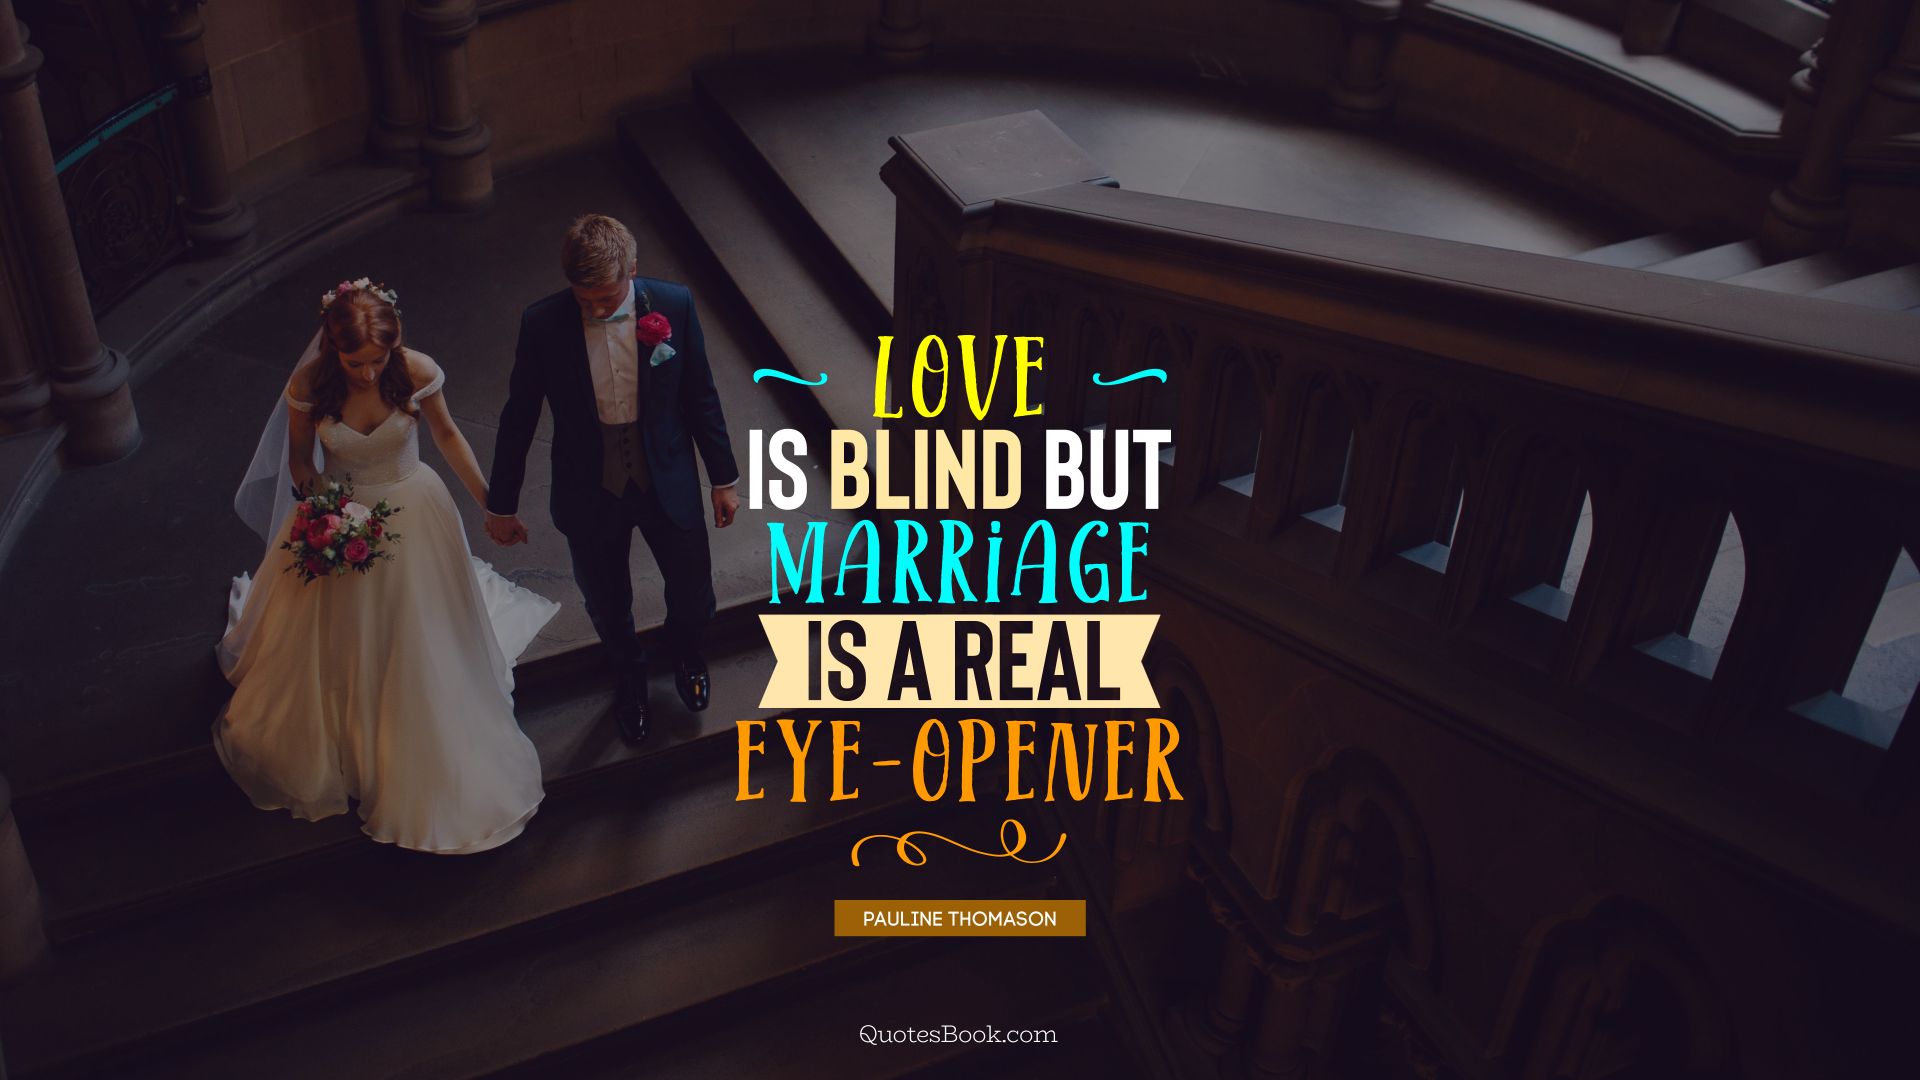 Love is blind but marriage is a real eye-opener. - Quote by Pauline Thomason